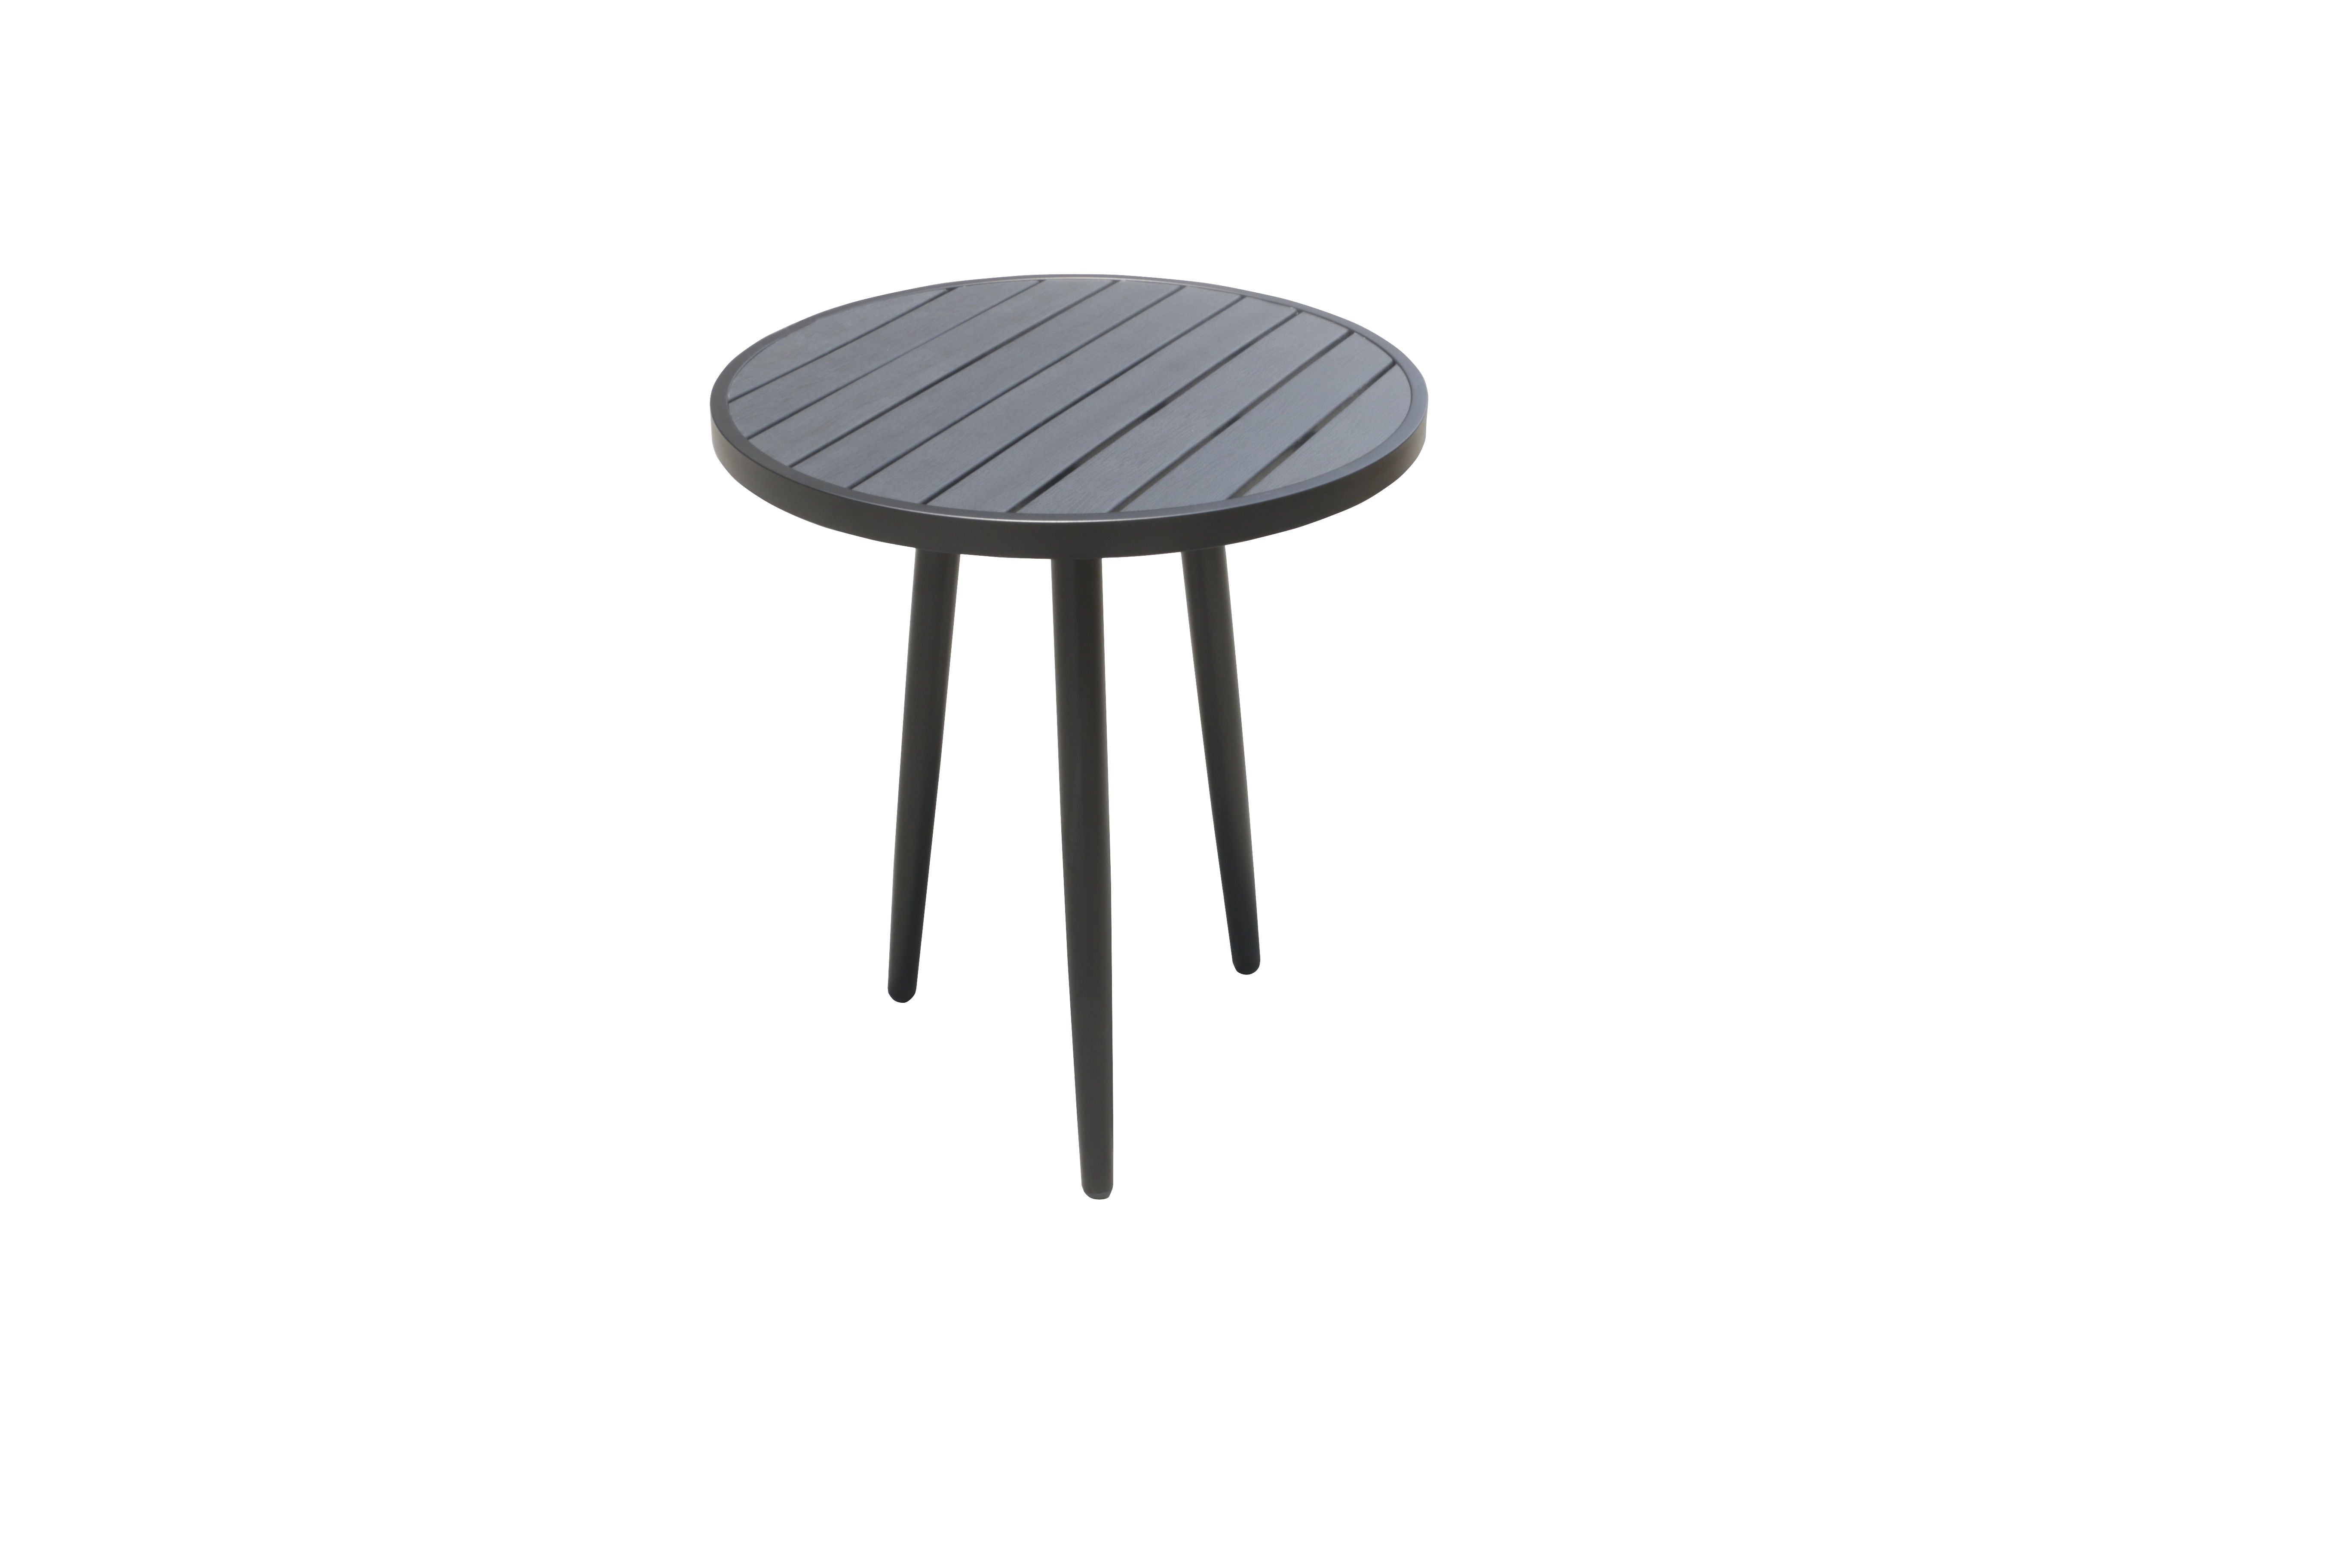 MOSS MOSS-T005 - Maroma Collection, Round side table with black polywood slats for surface and black angled aluminum legs, Dia 24" x H 28,5"